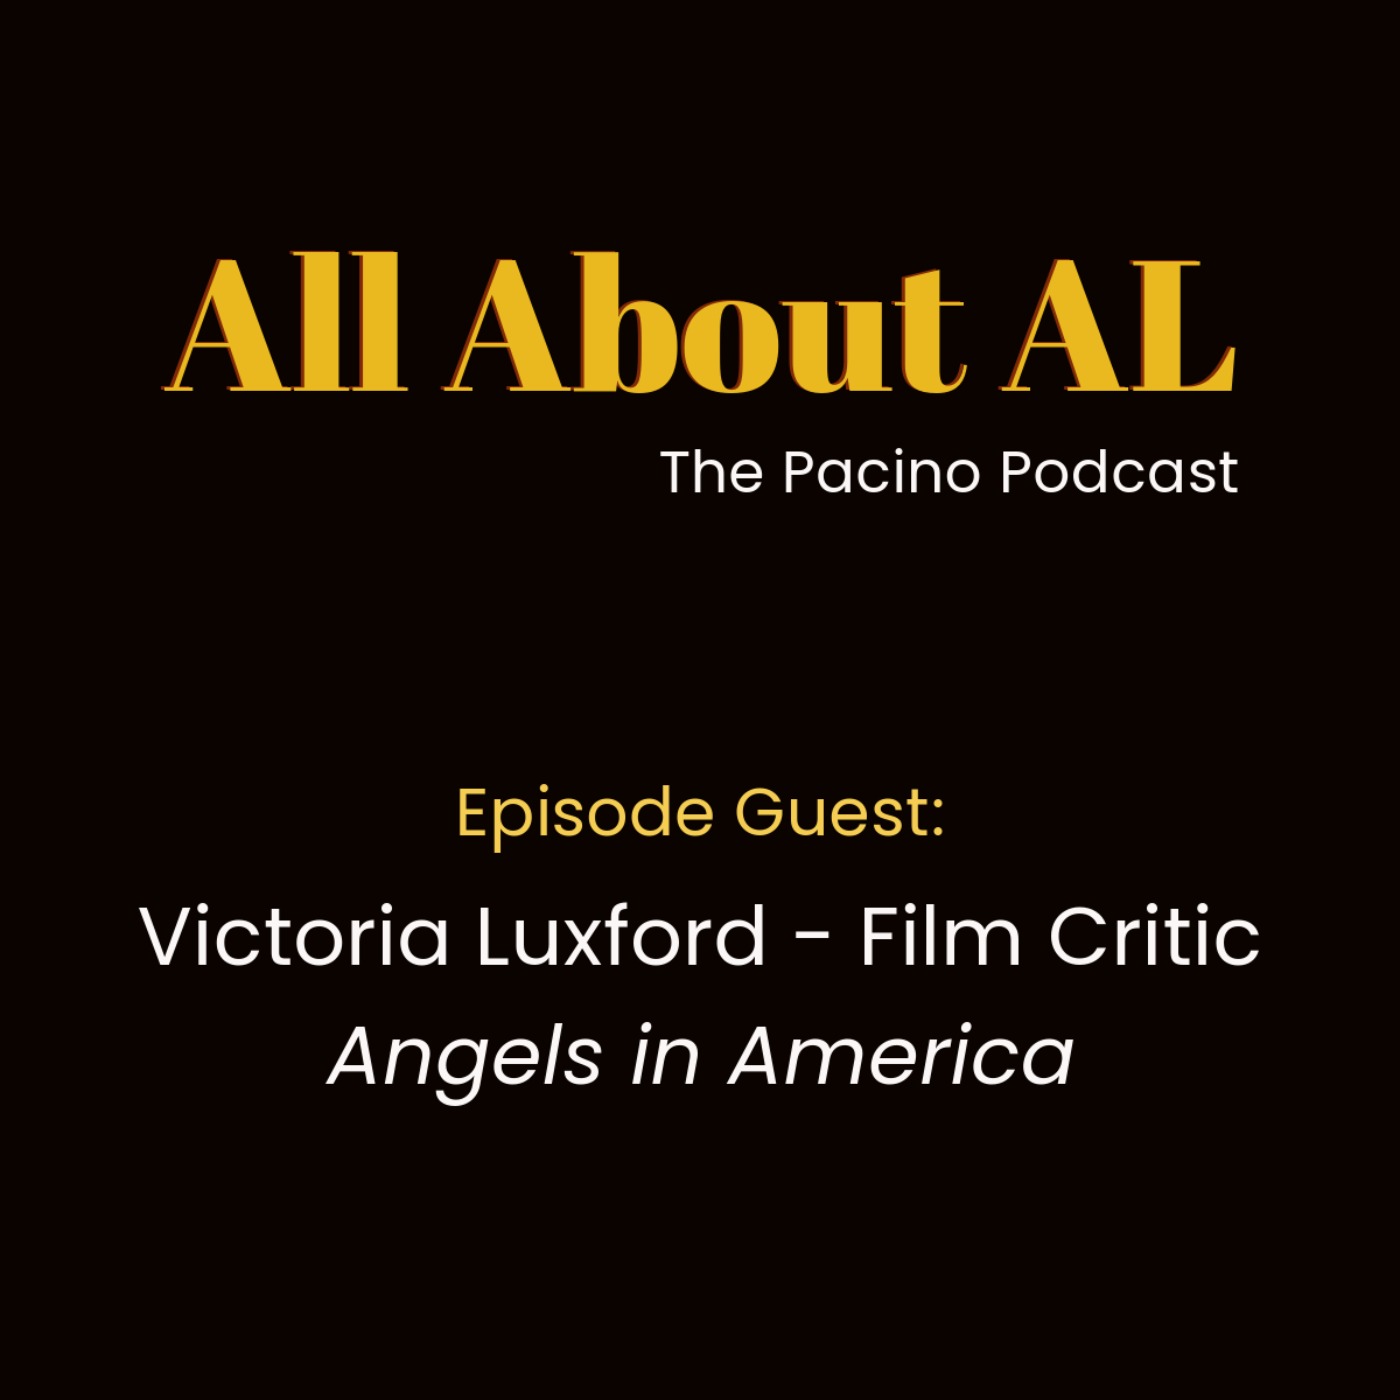 Episode 5: Angels In America with Victoria Luxford